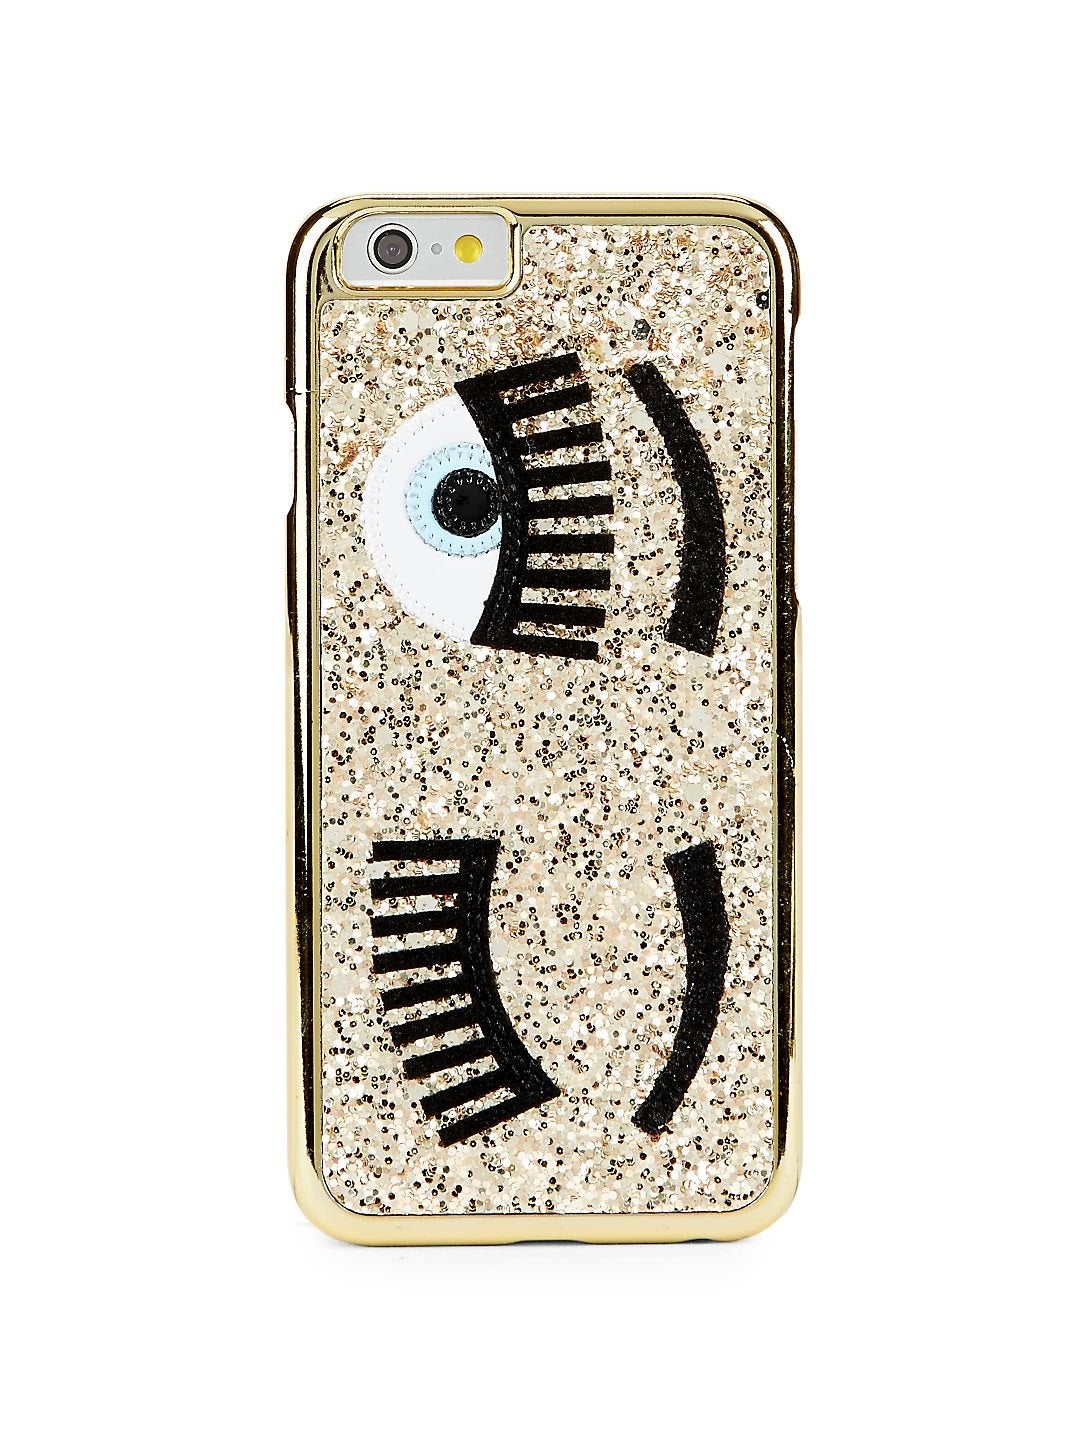 12 Fabulous Phone Cases To Give As Stocking Stuffer Gifts This Christmas